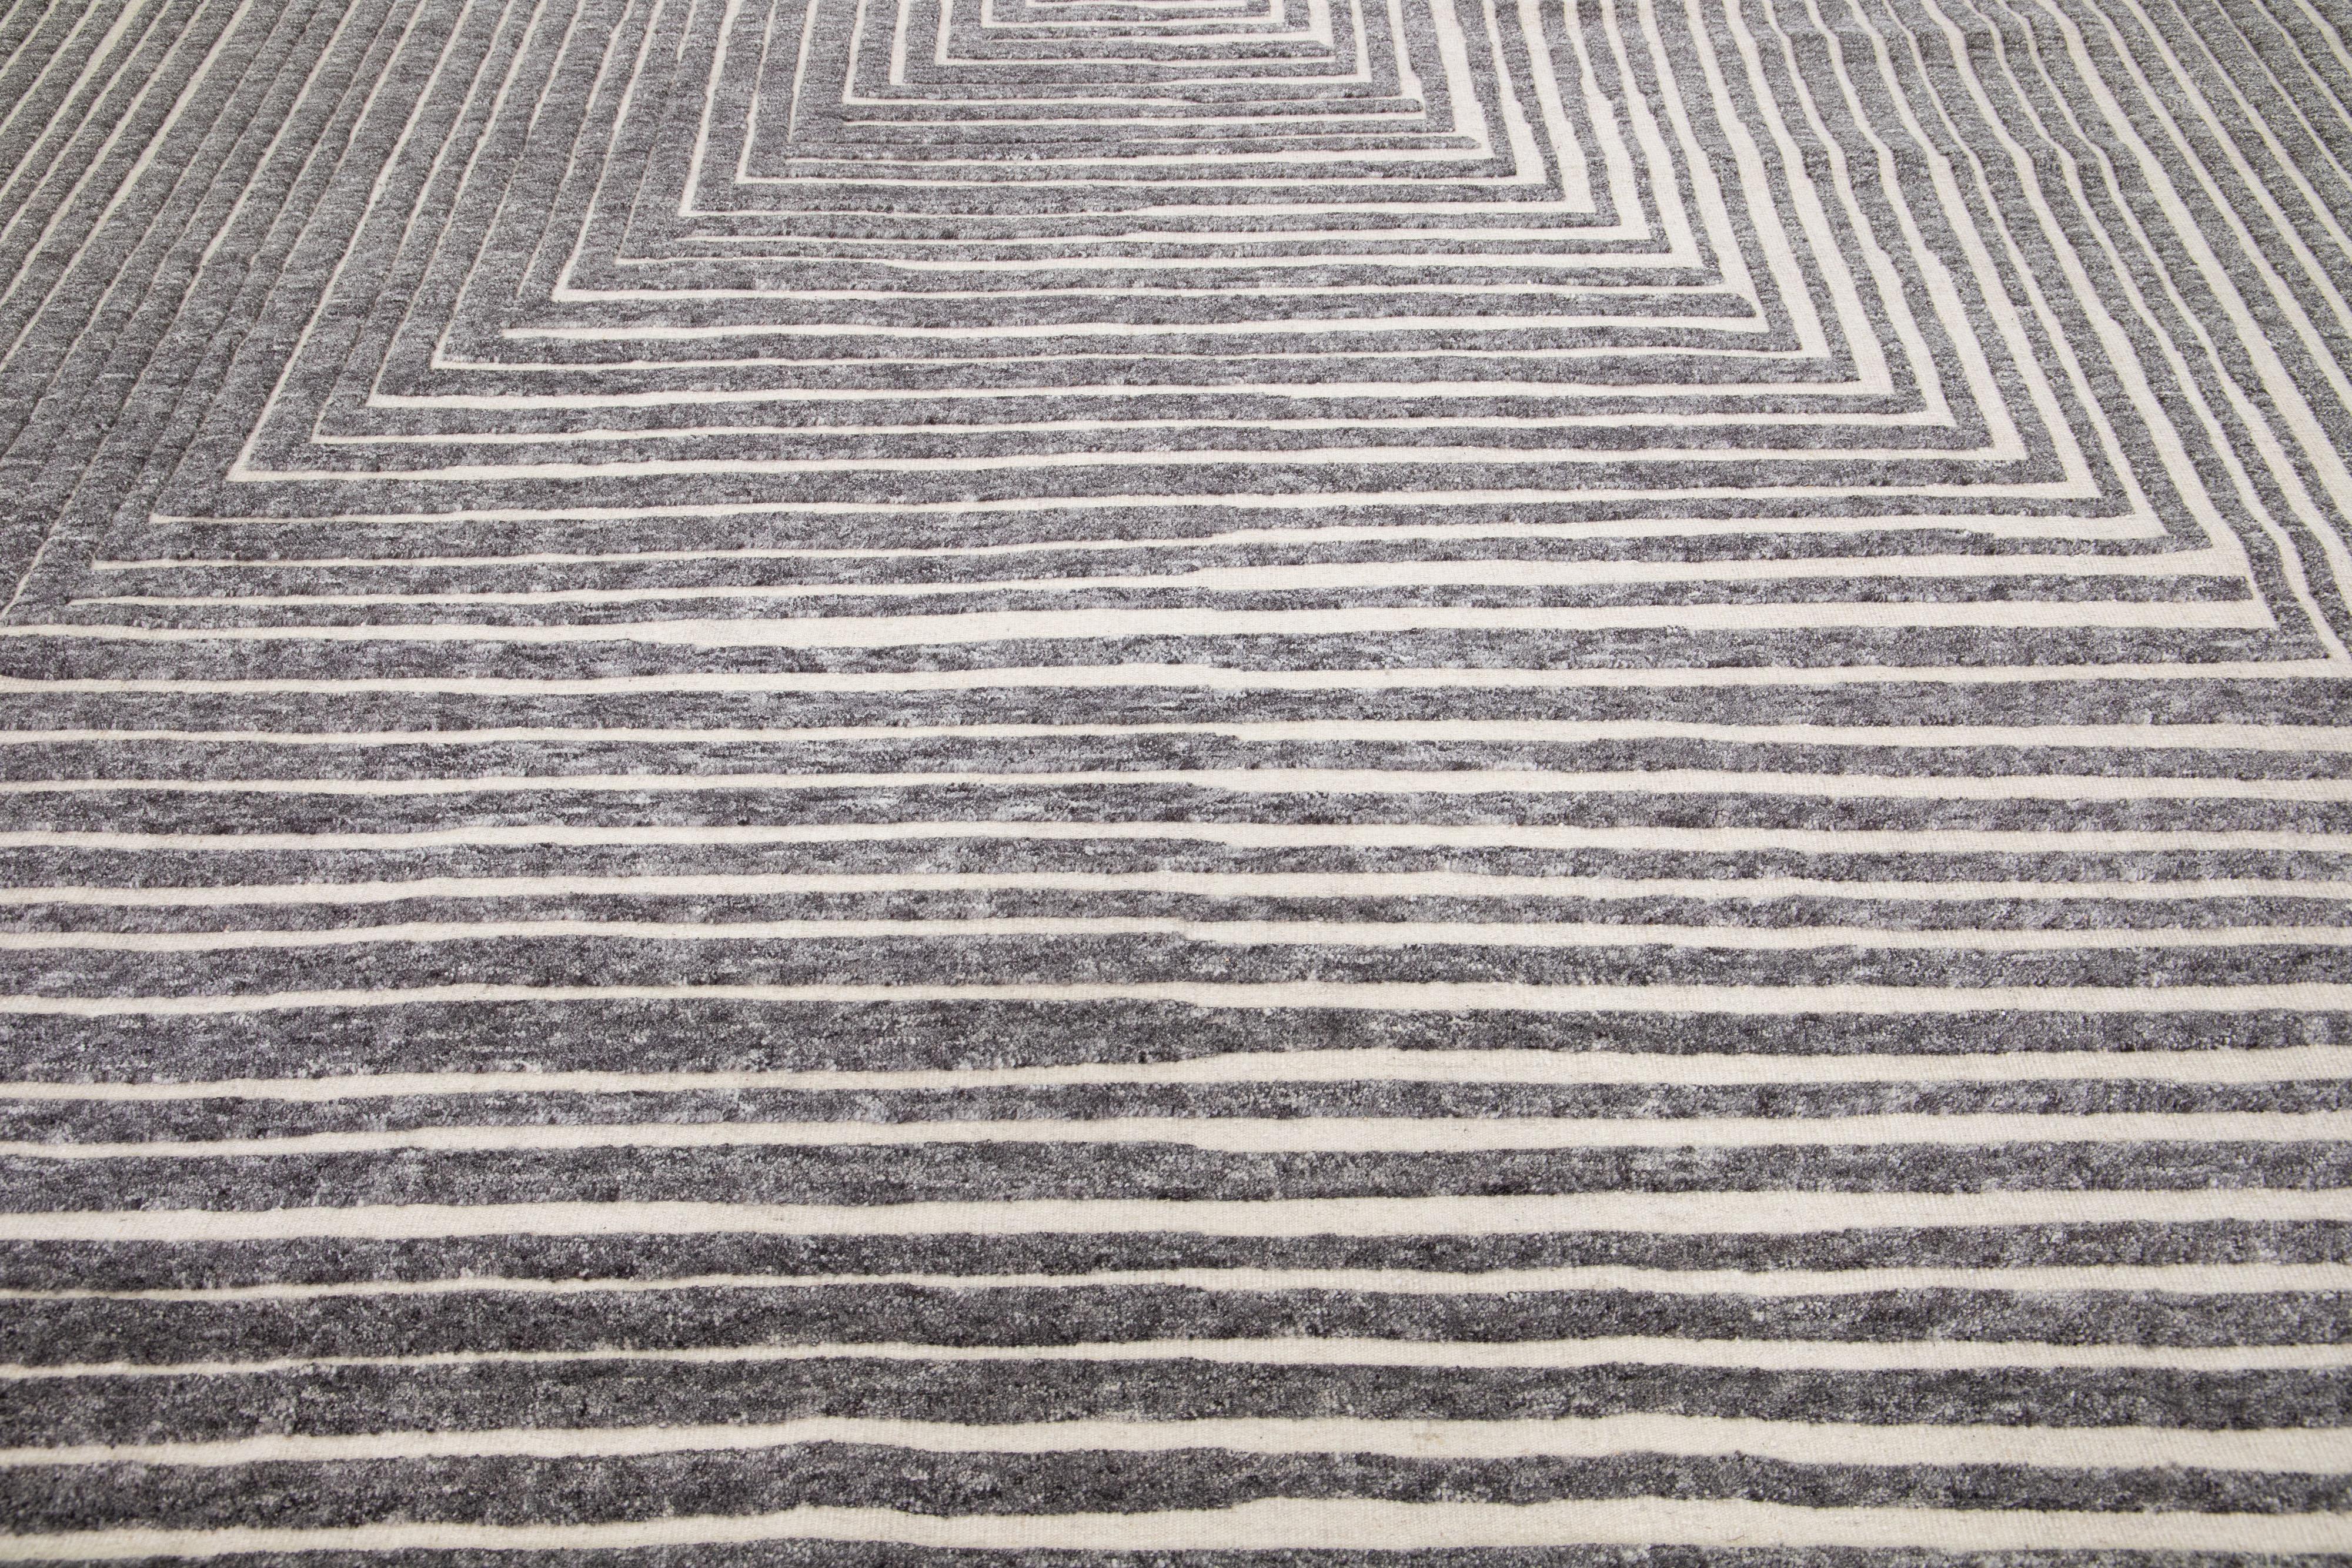 Beautiful modern Moroccan-style hand-knotted wool rug with a beige color field. This rug is part of our Apadana's Safi Collection and features an Op Art squares seamless design in gray.

This rug measures: 12'1